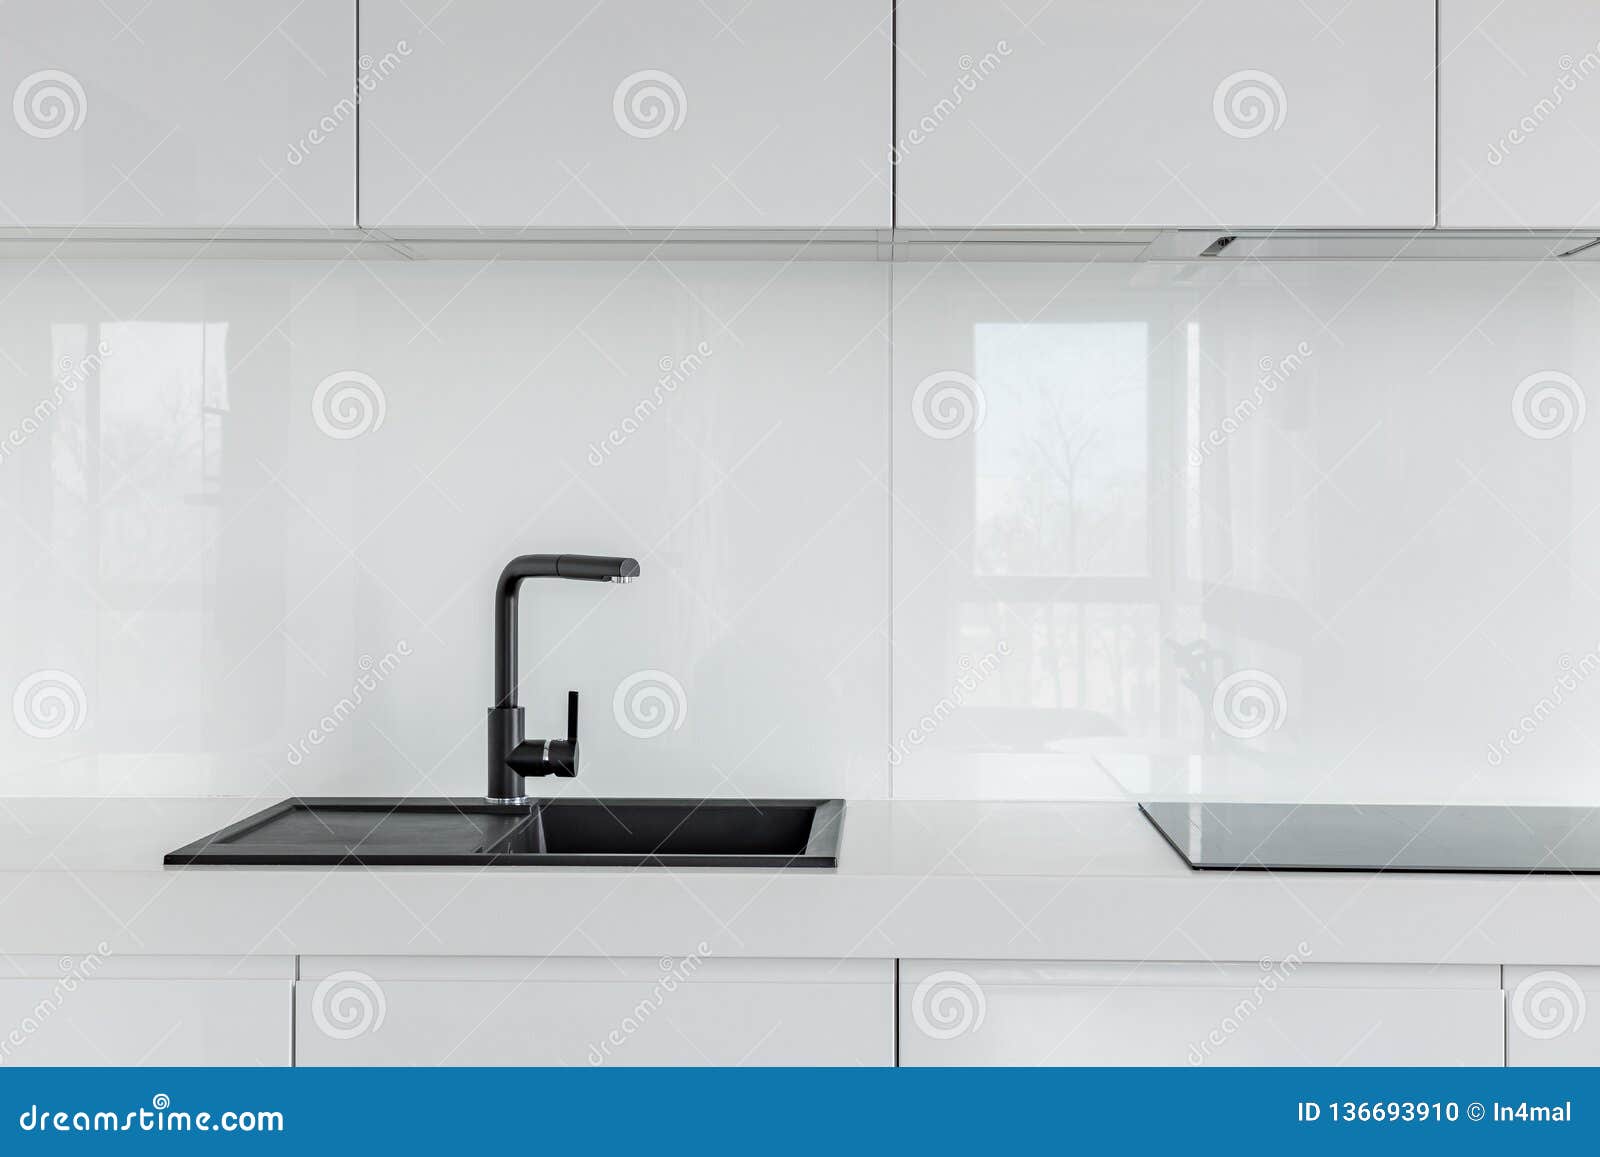 High Gloss White Kitchen Cabinets Stock Photo Image Of Furniture